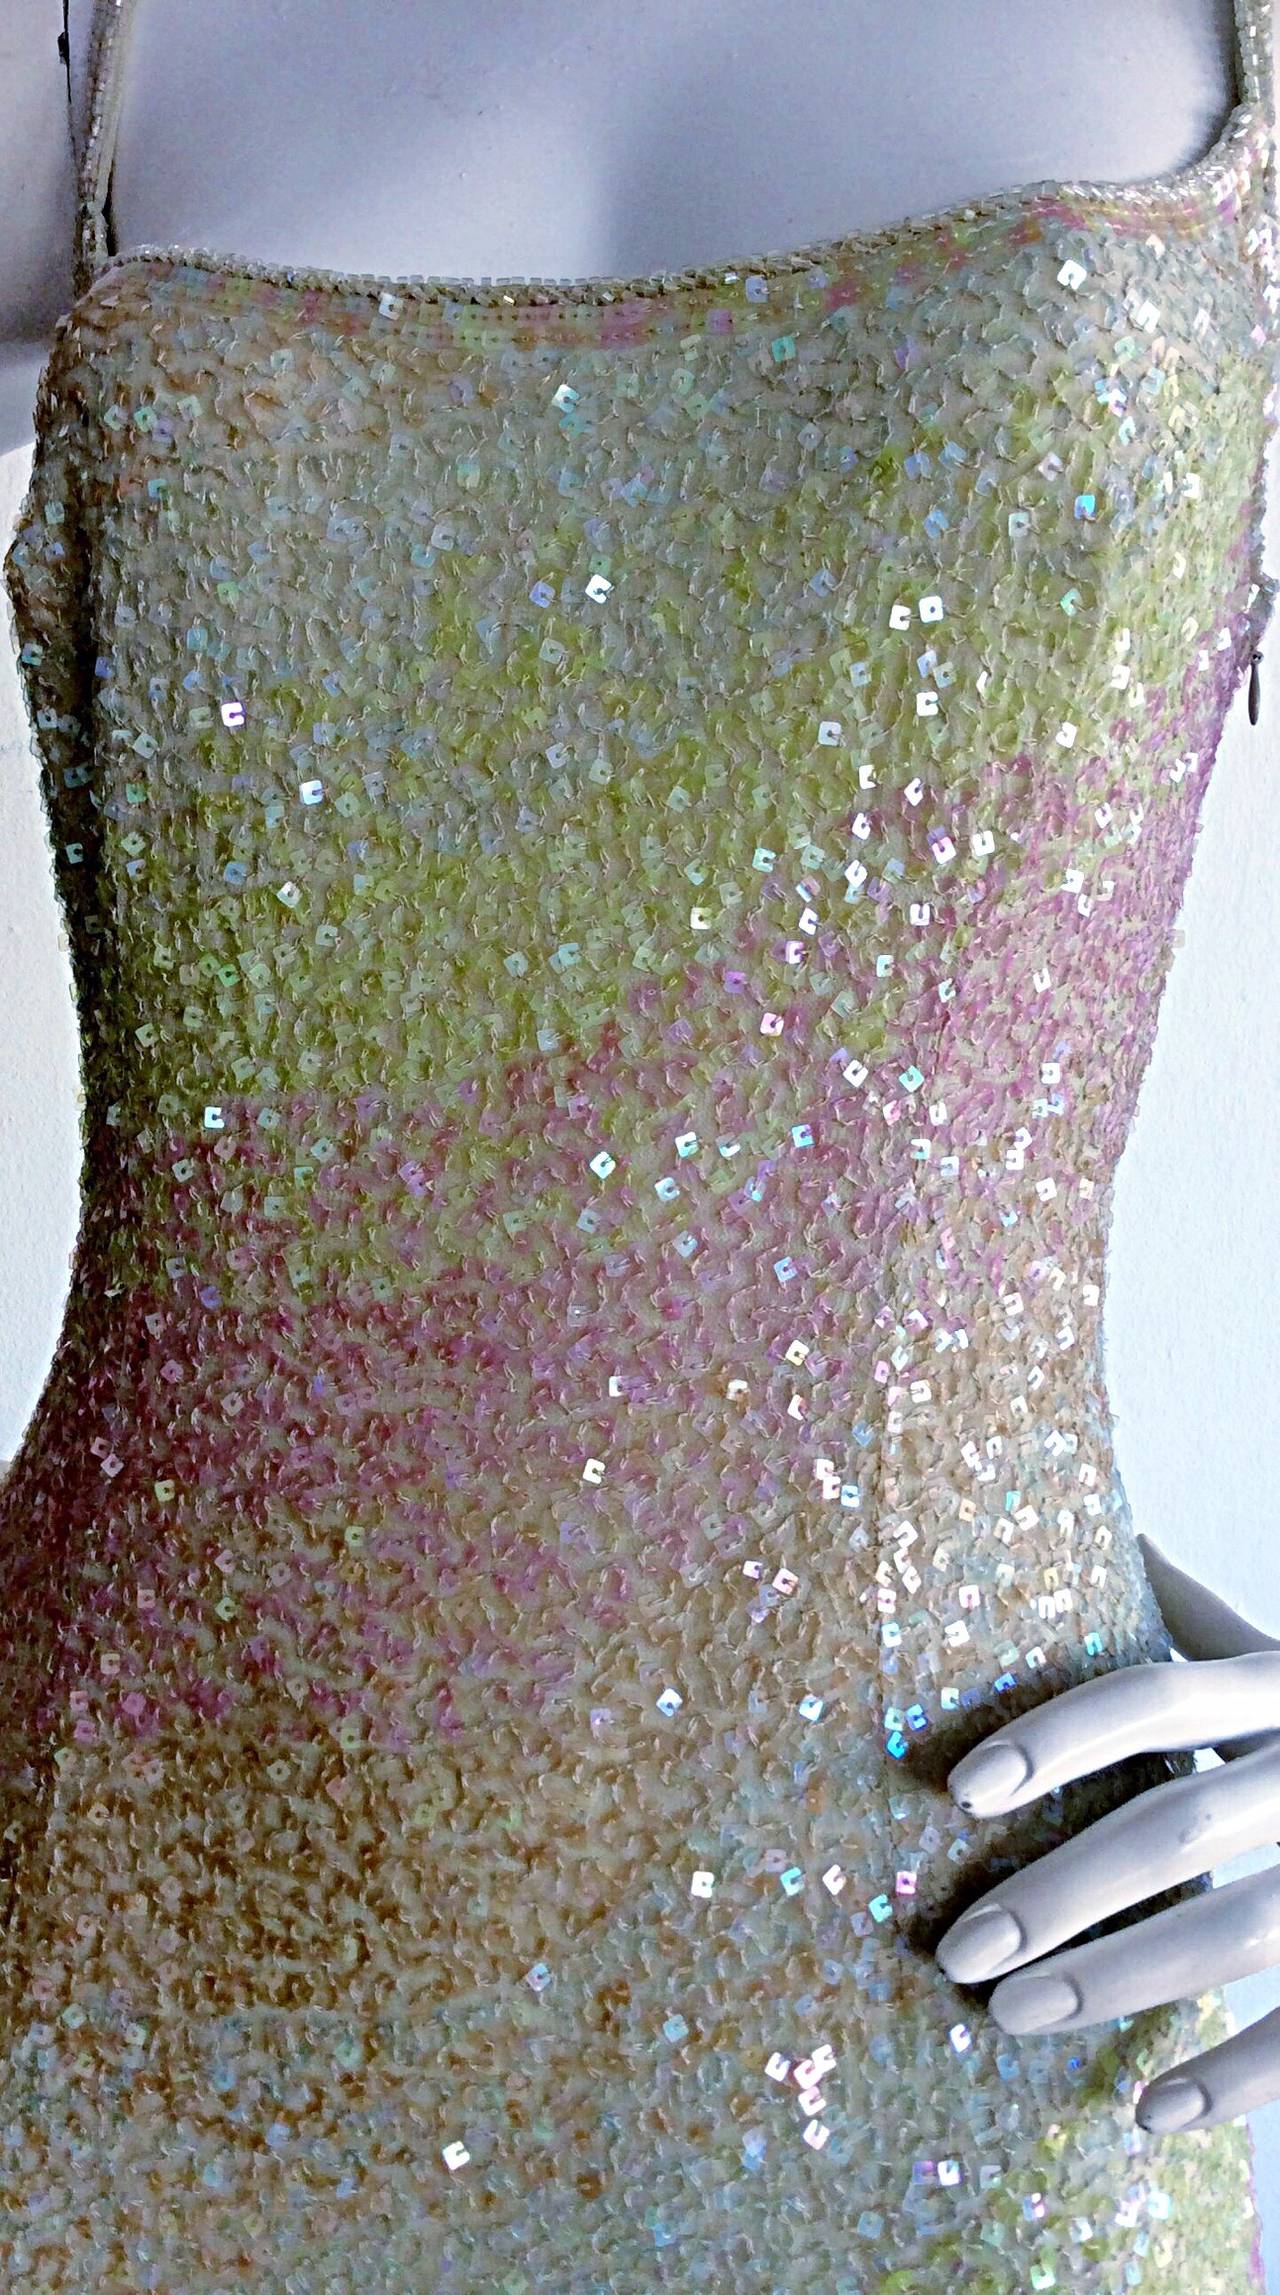 Drop dead gorgeous vintage Frank Usher sequin rainbow gown! All-over sequins and beads make for a remarkable effect. 100% Silk, fully lined. Marked Size UK 12. Approximately Size Medium-Large

Measurements:
40 inch bust
34 inch waist
46 inch